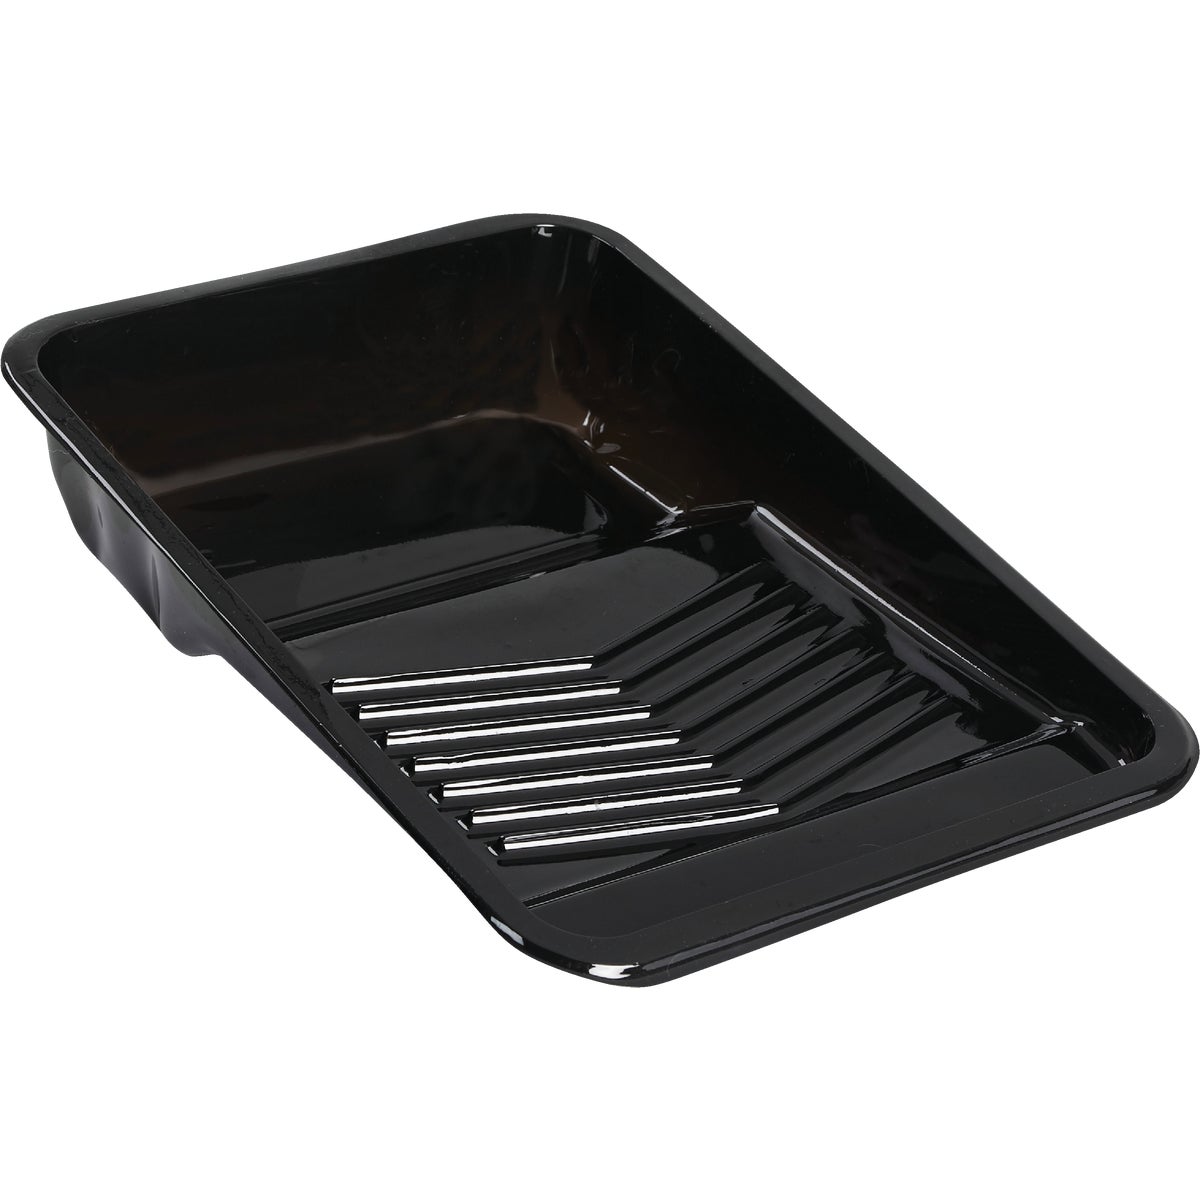 Item 791398, Deep well 9 In. plastic tray liner is solvent resistant. 2 Qt. capacity.